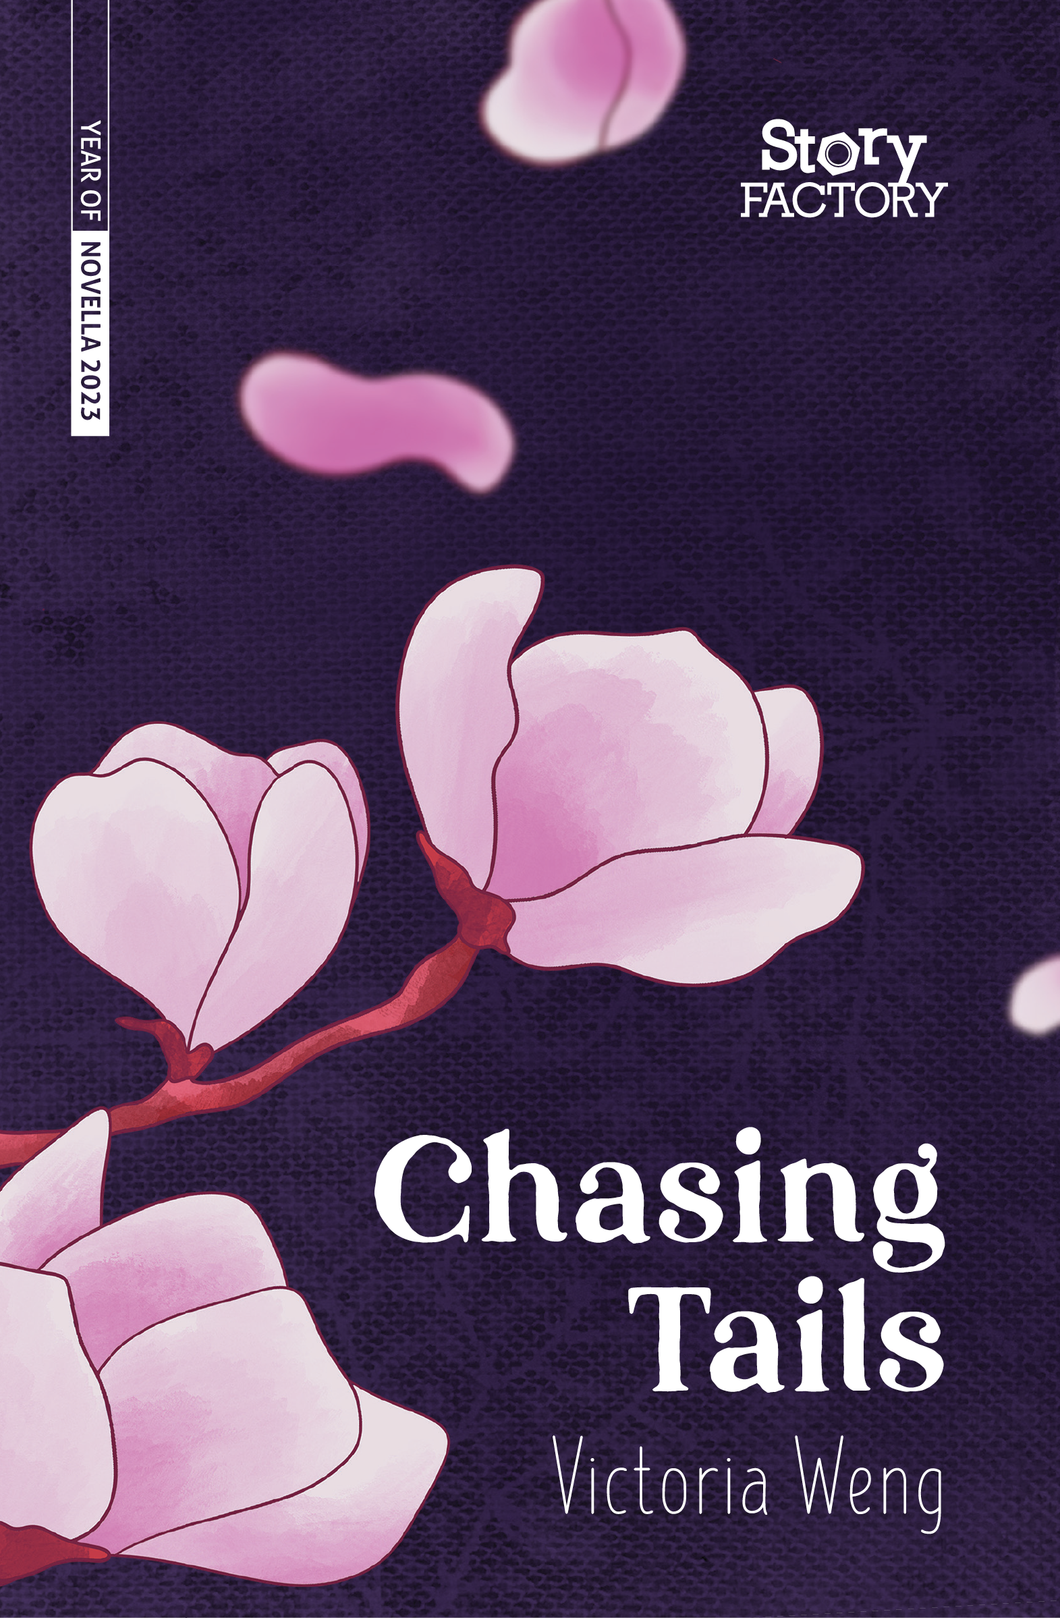 Chasing Tails by Victoria Weng